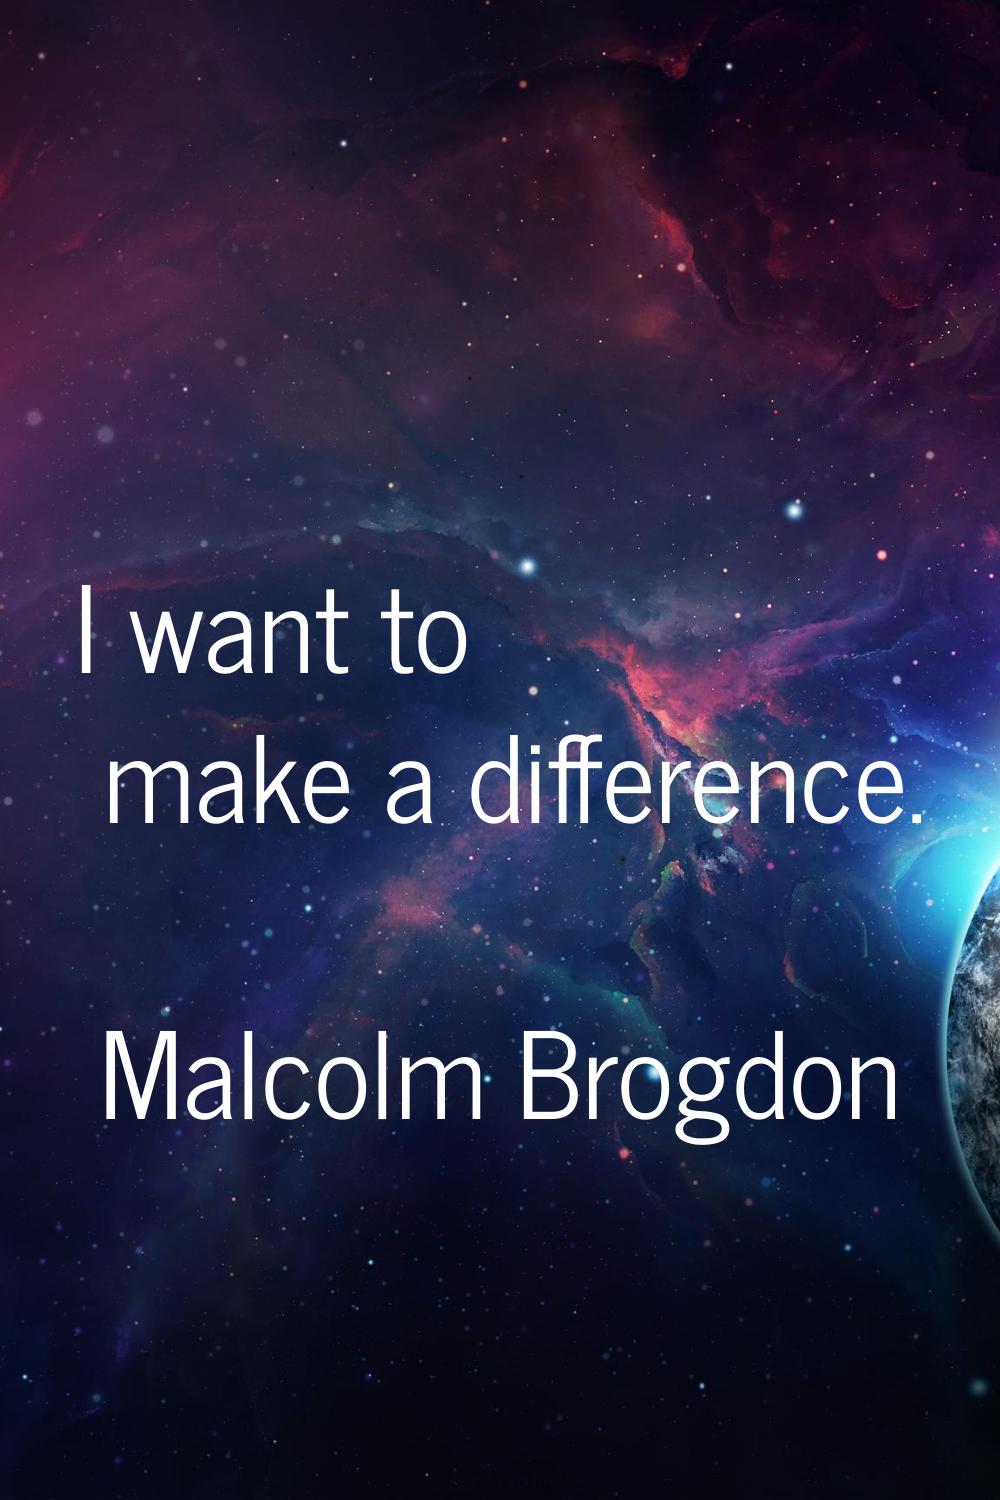 I want to make a difference.